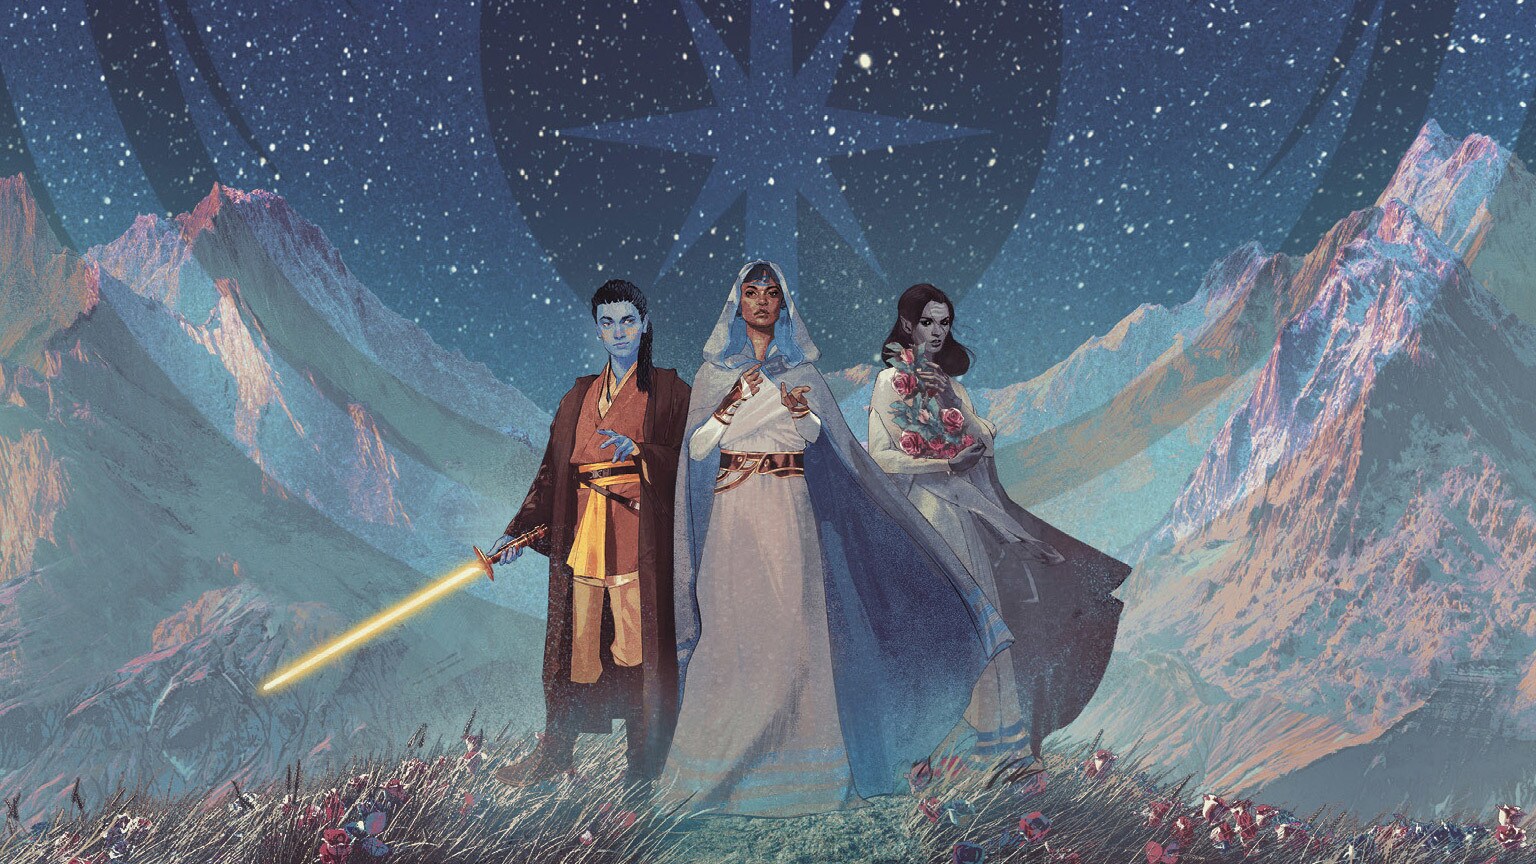 Star Wars: The High Republic Phase II Cover Art Revealed on Star Wars: The High Republic Show